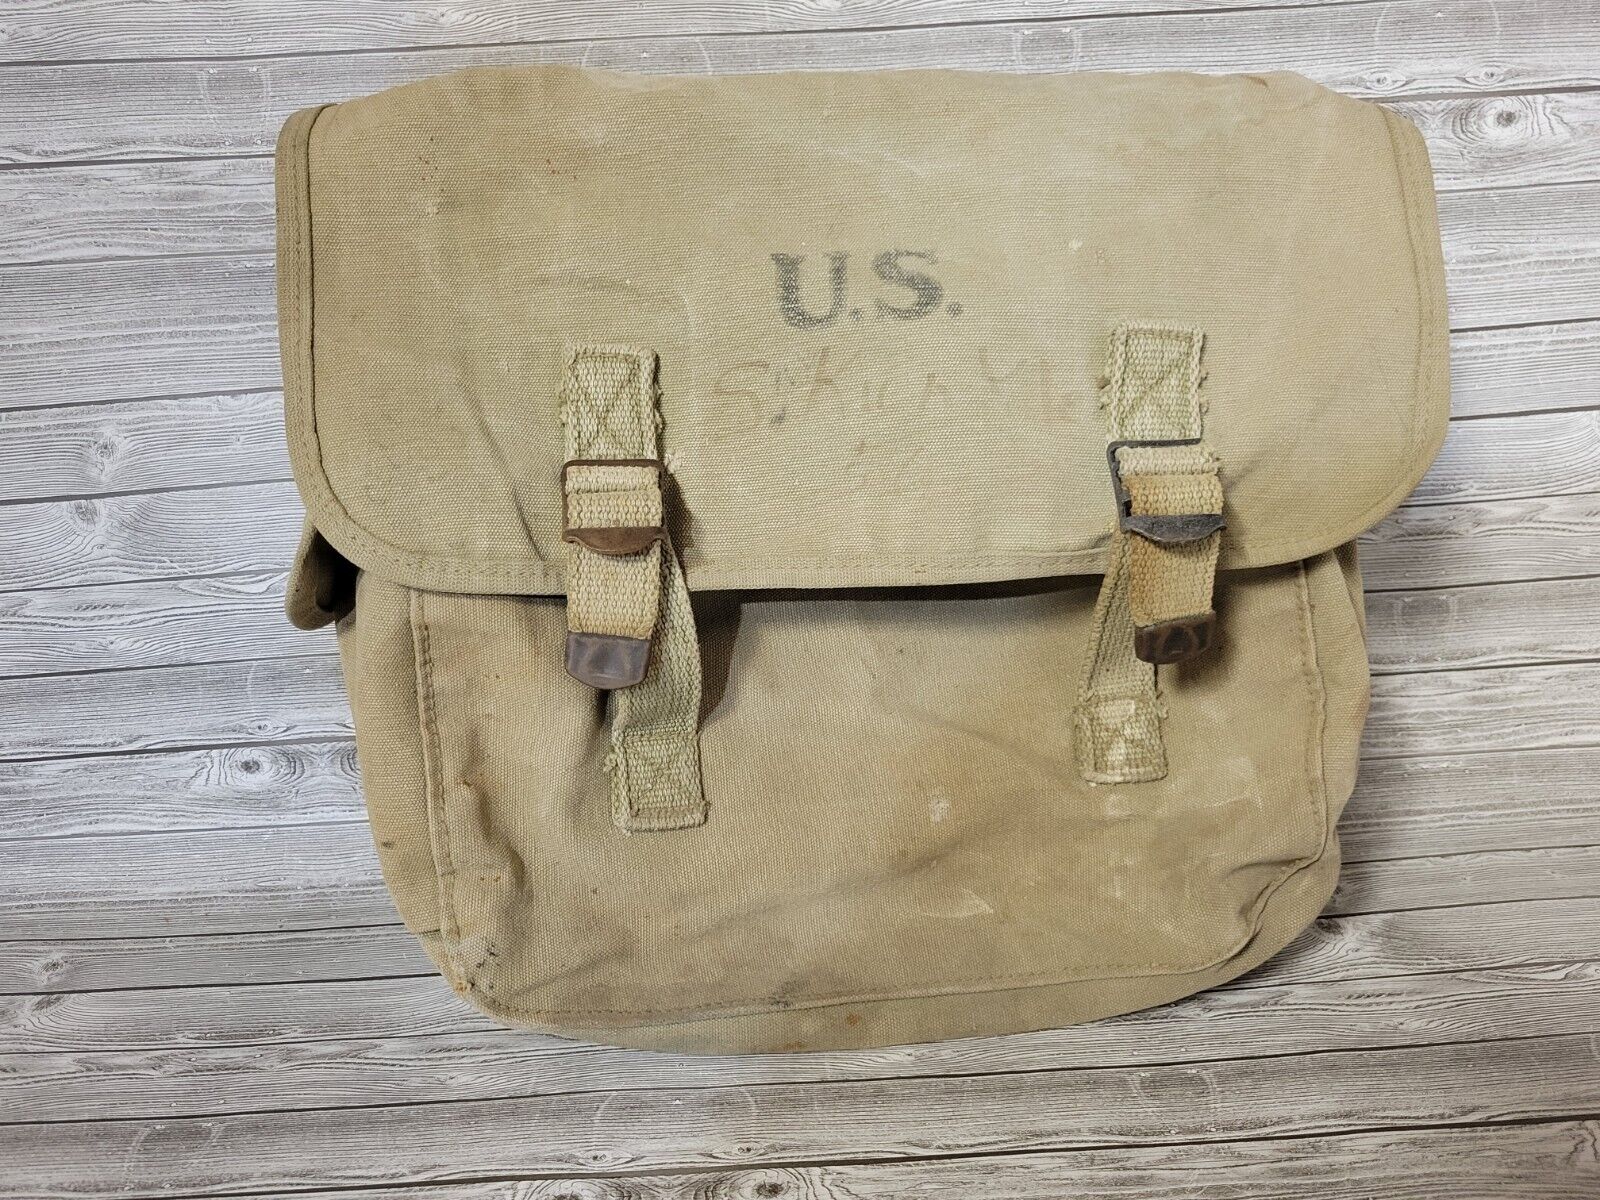 WW2 US Army Military M1936 Musette Shoulder Bag Field Gear LUCE MANUFACTURE 1942